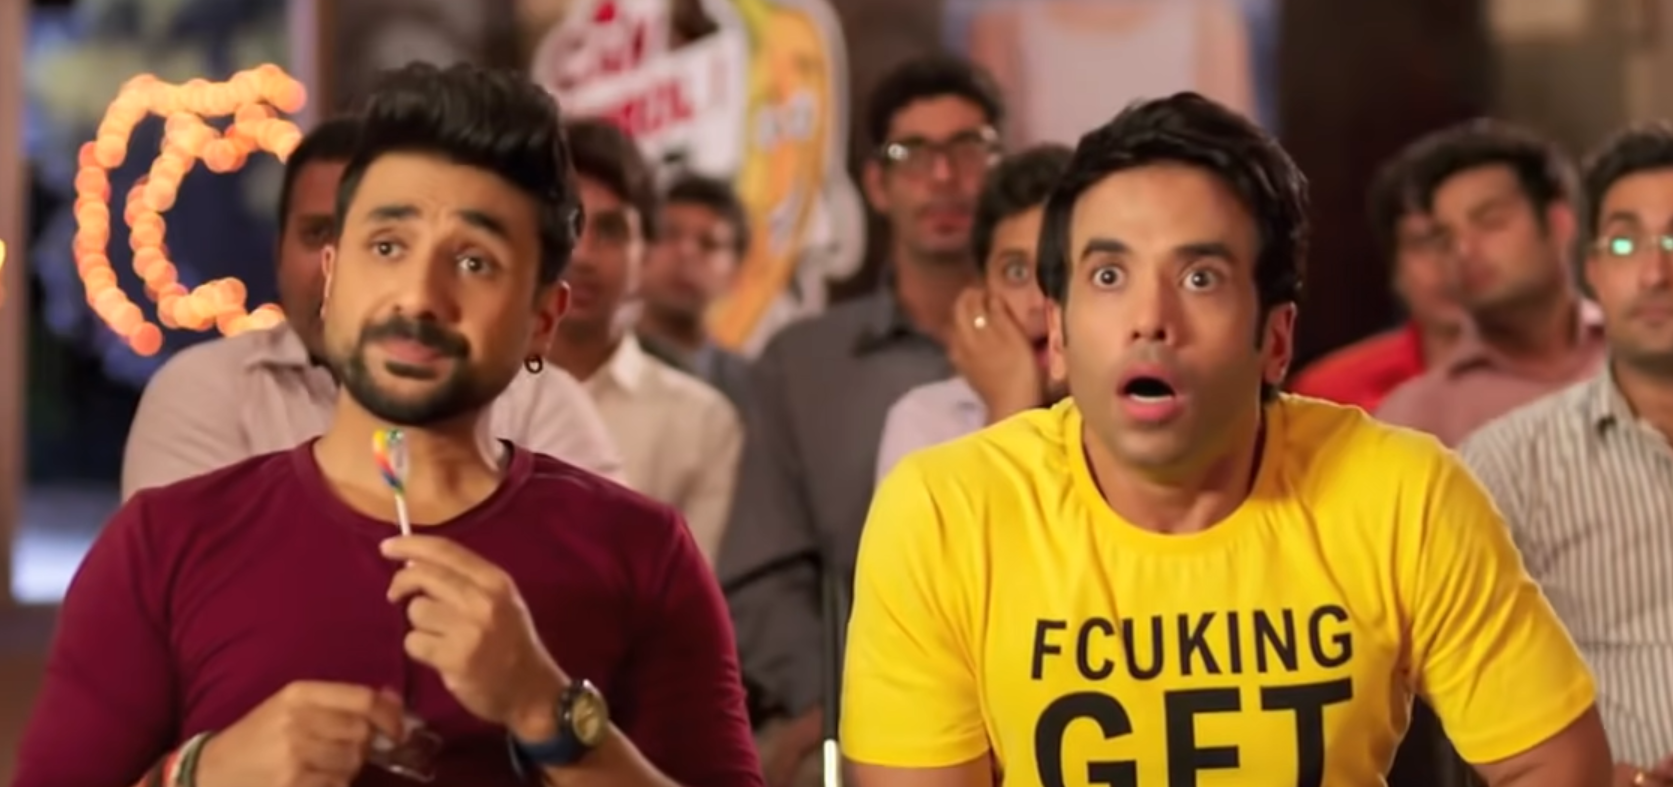 Vir Das and Tusshar Kapoor looking shocked while sitting next to each other